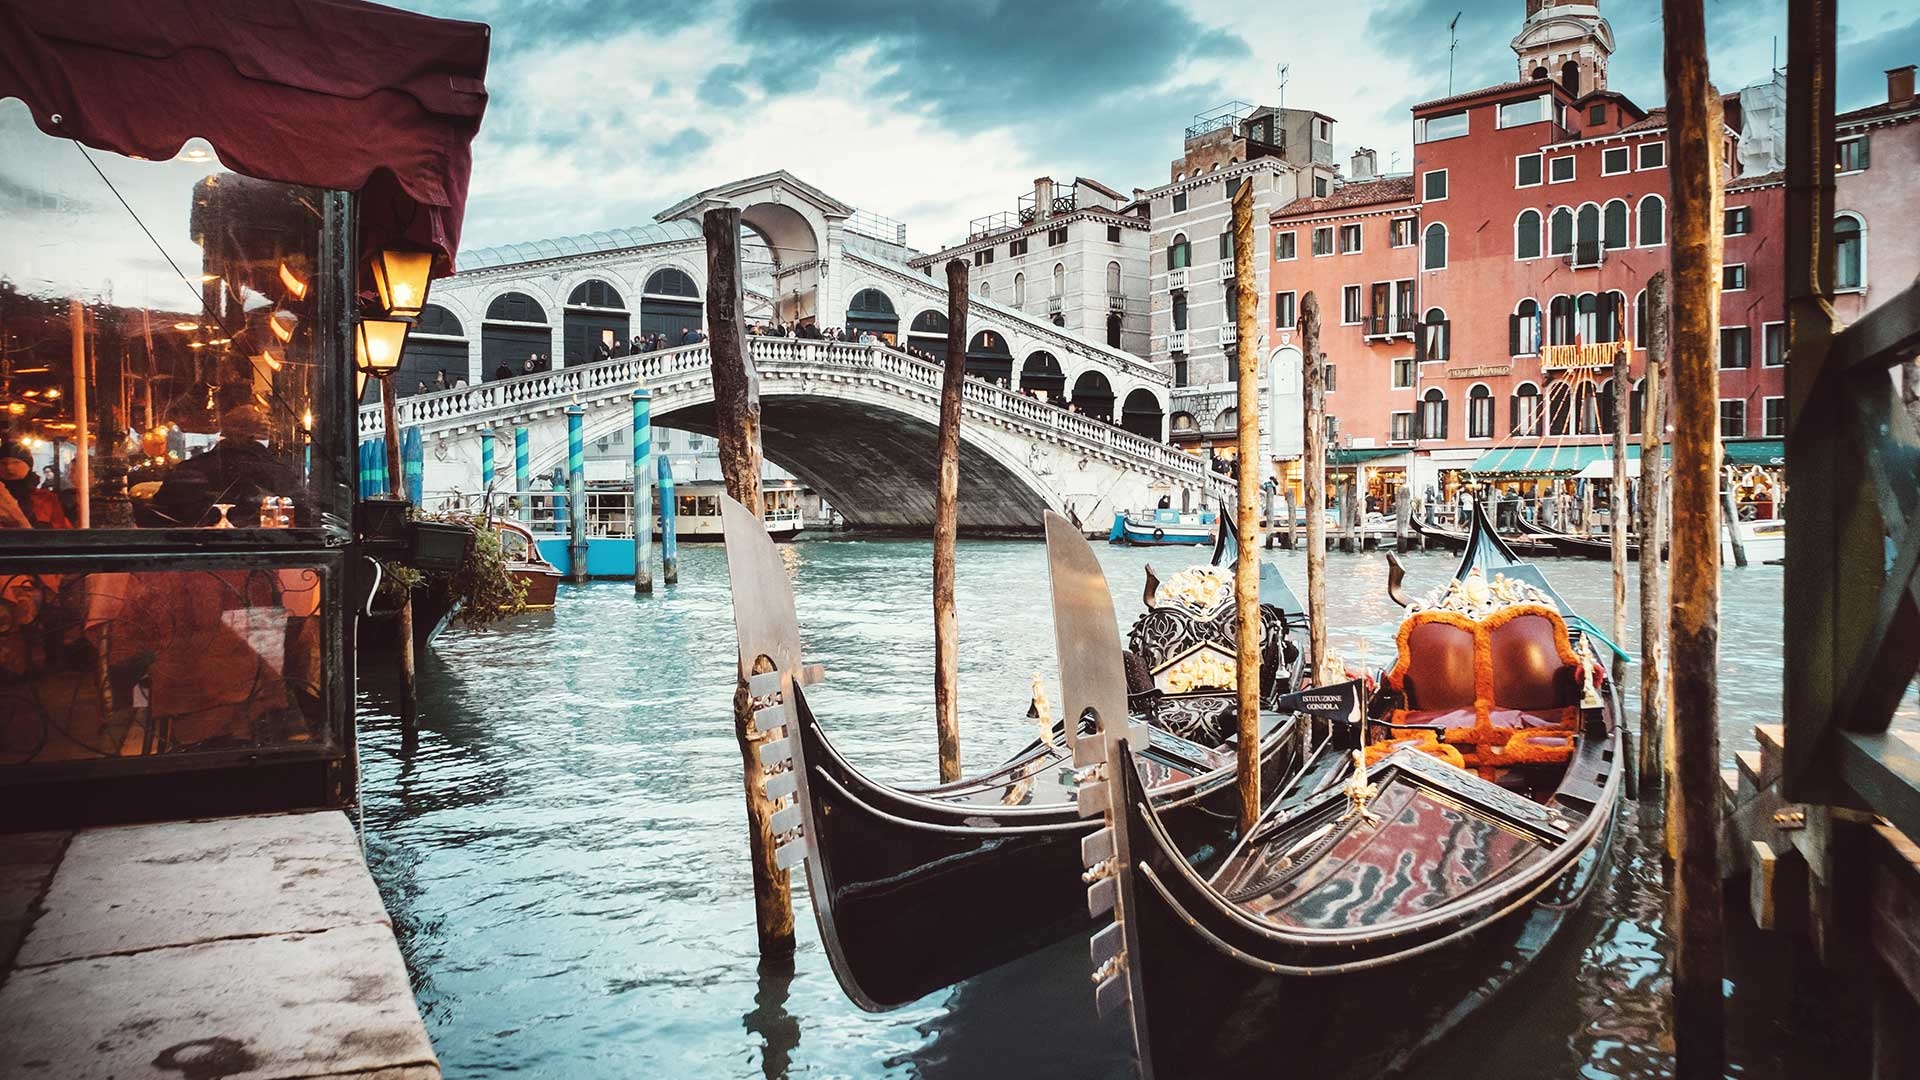 Rialto Bridge, Its fascinating history, Touring different, Another Venice, 1920x1080 Full HD Desktop